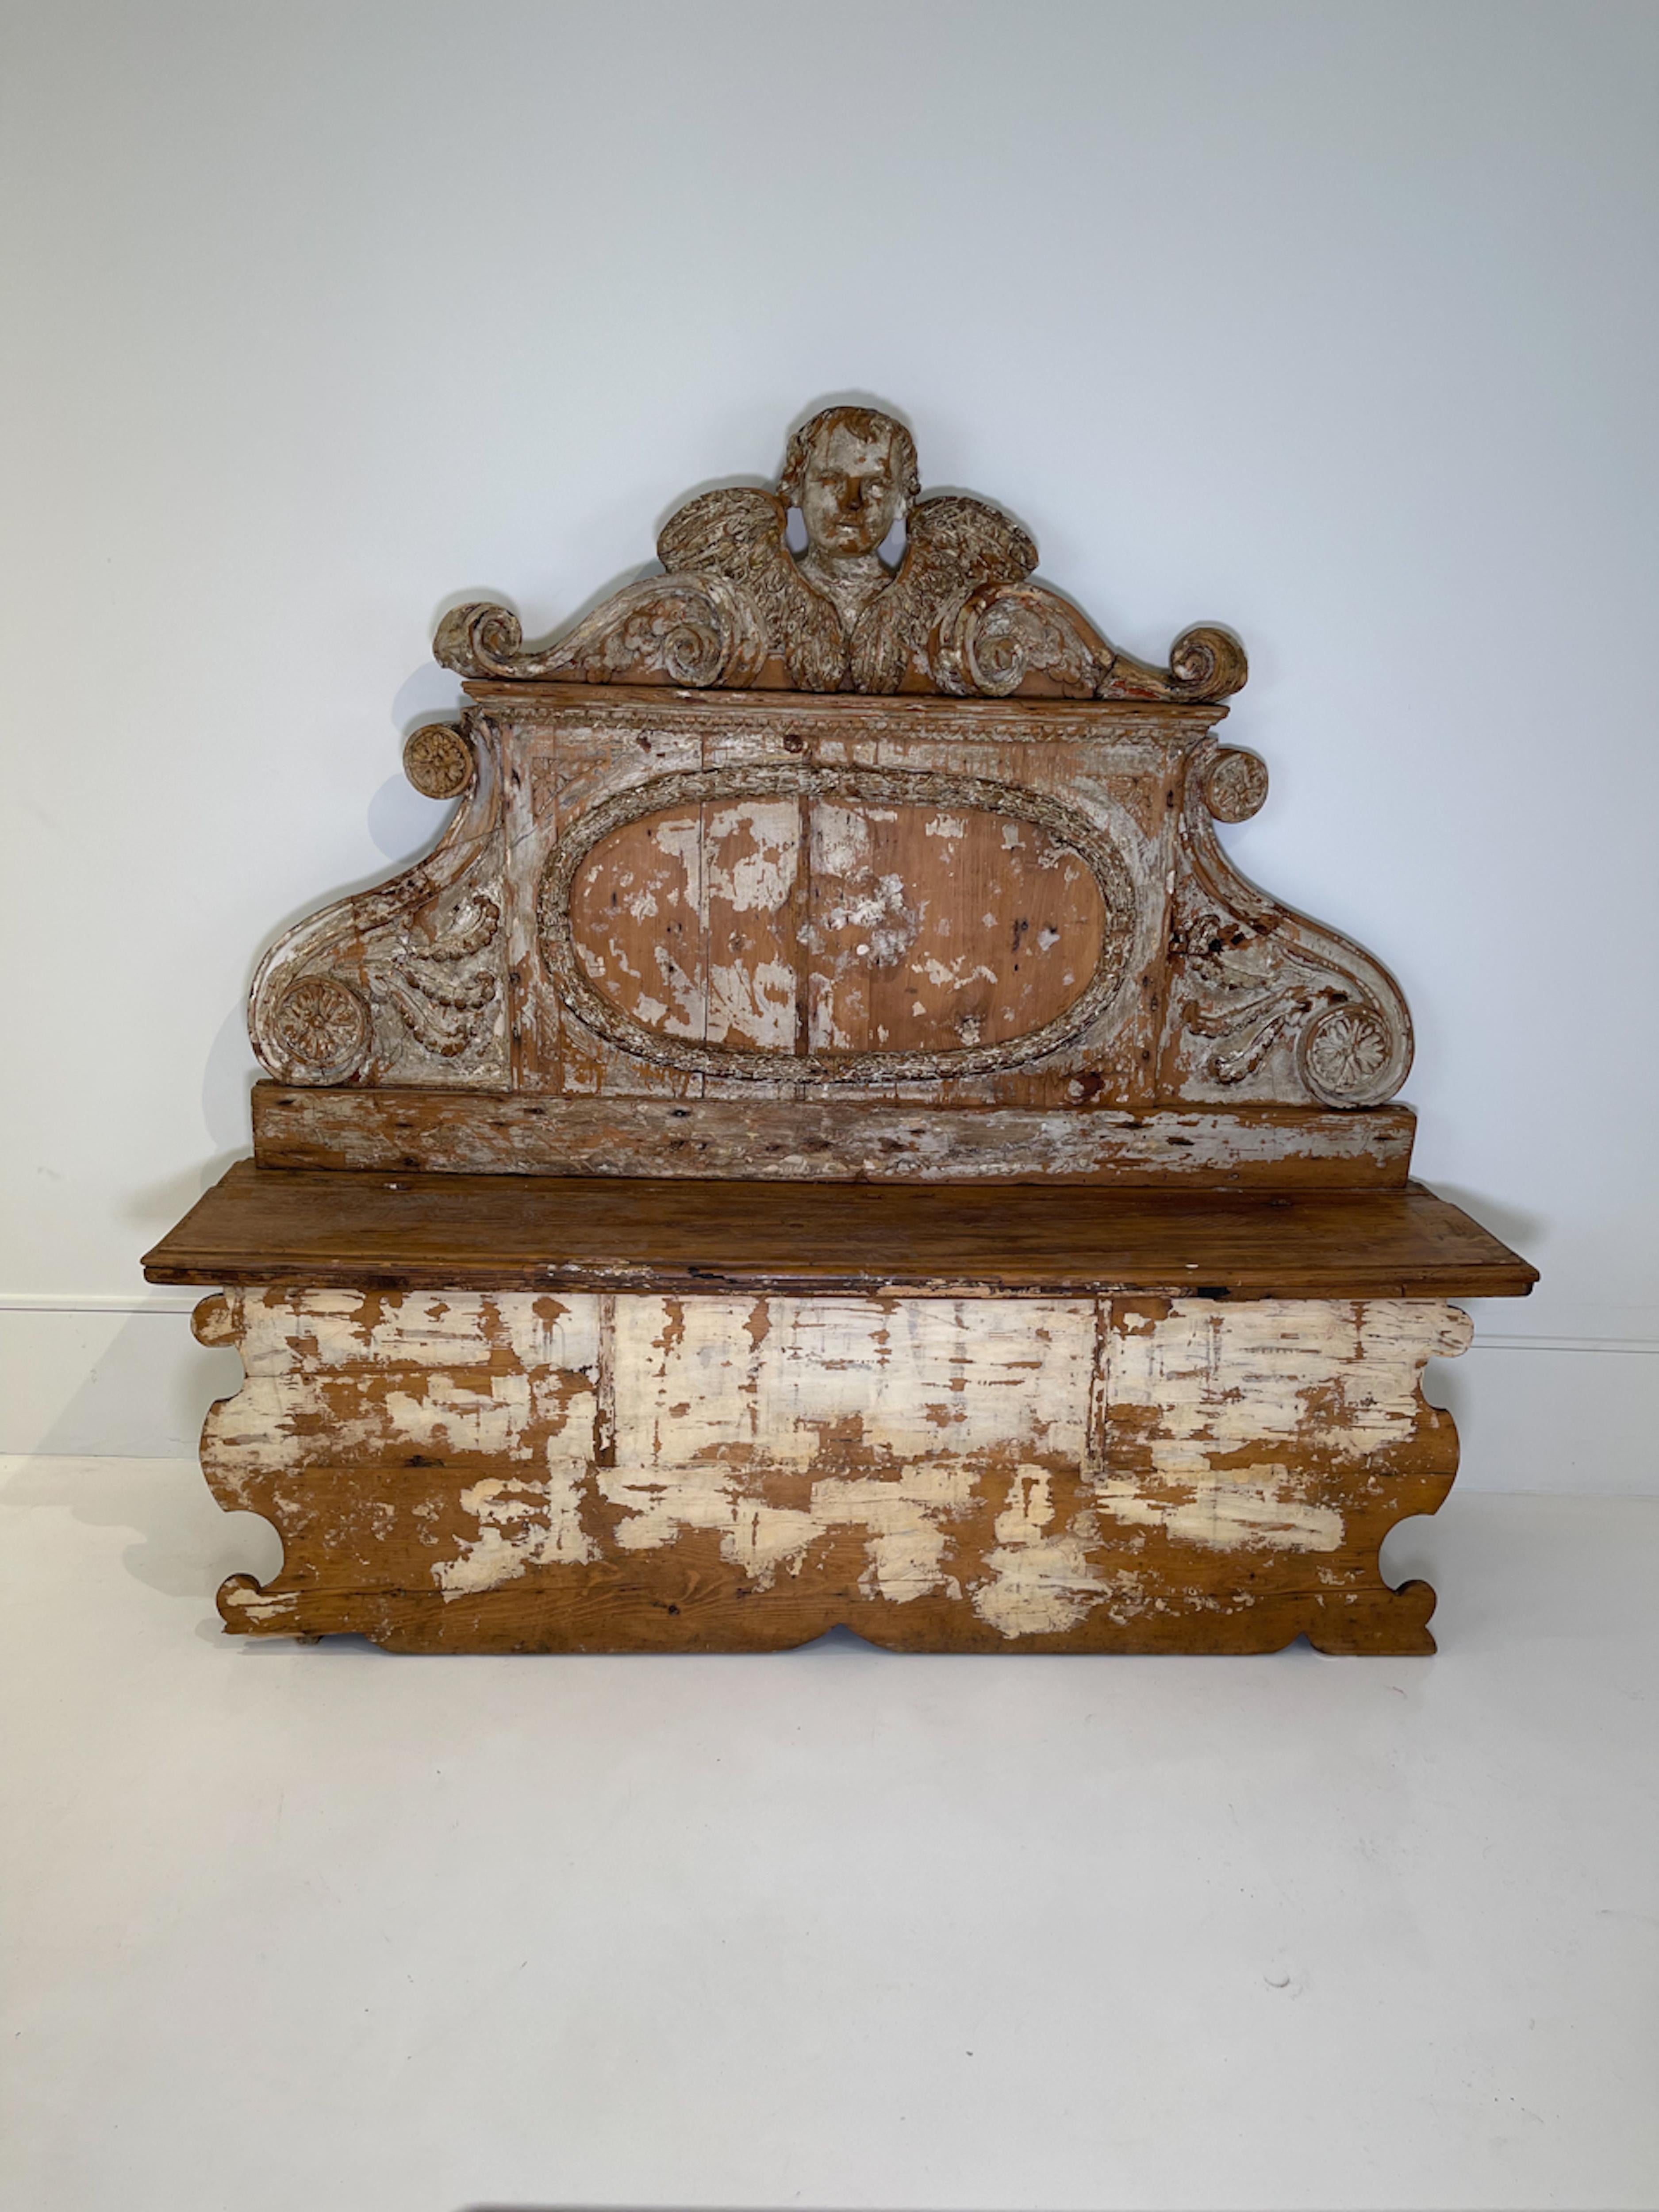 18th Century Italian wooden bench. Unique large scale wooden bench with beautifully carved details of an angel's face and wings, as well as scrollwork, florets and acanthus leaves. Was likely used in an entry hall for seating and storage and would